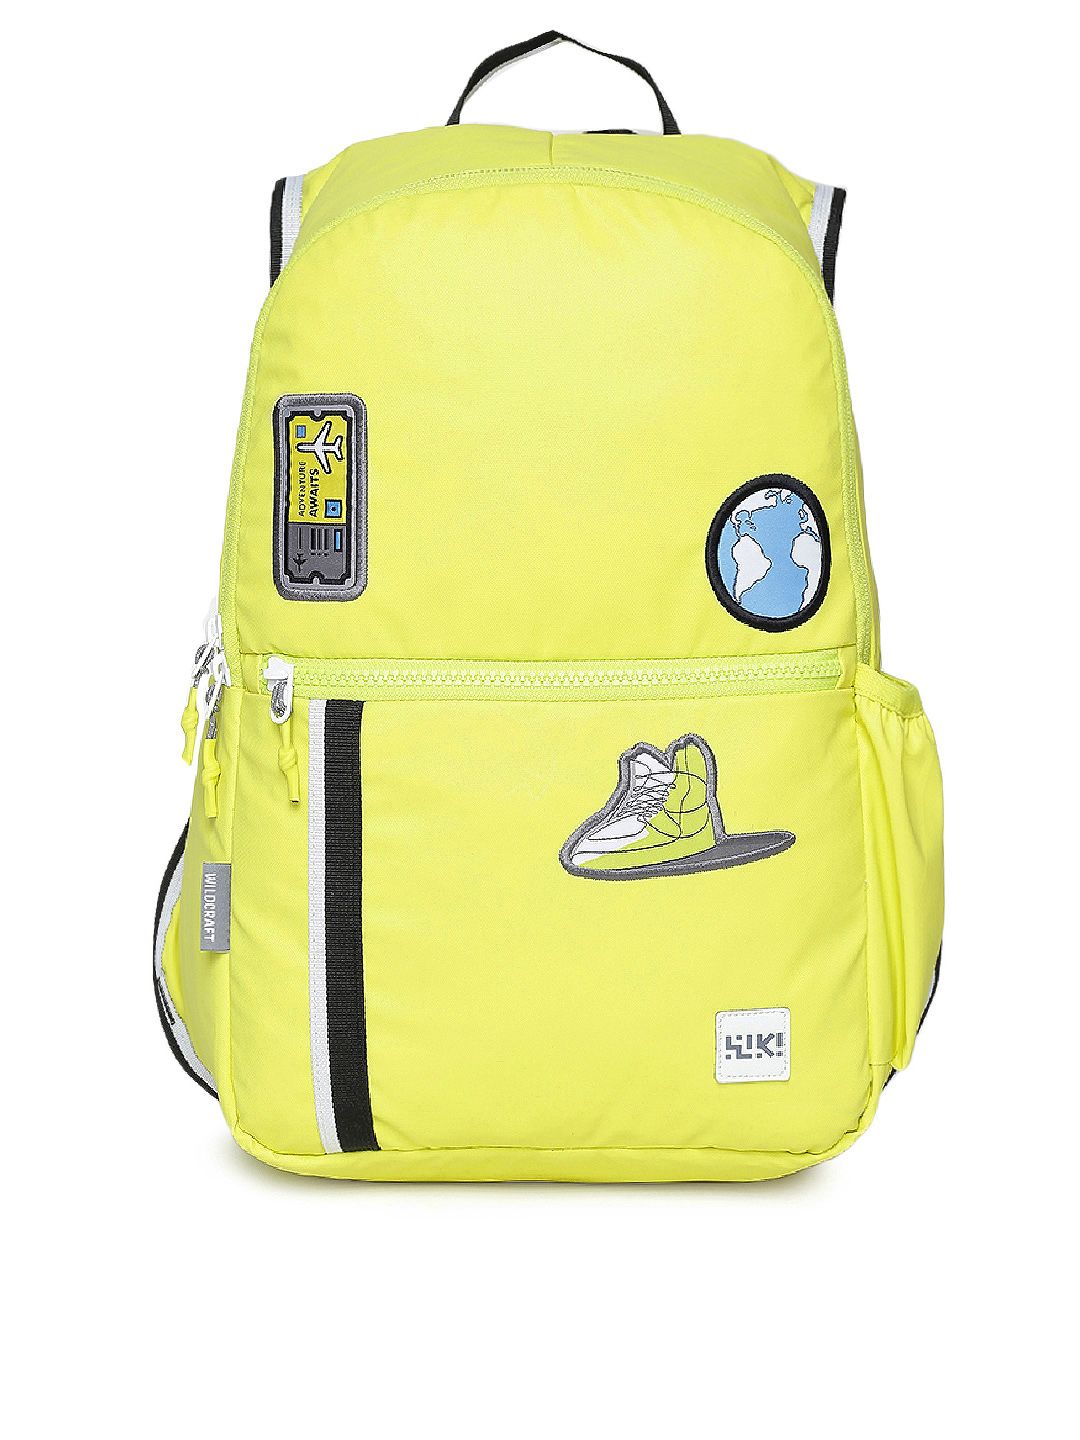 Wildcraft Unisex Yellow Solid Backpack Price in India